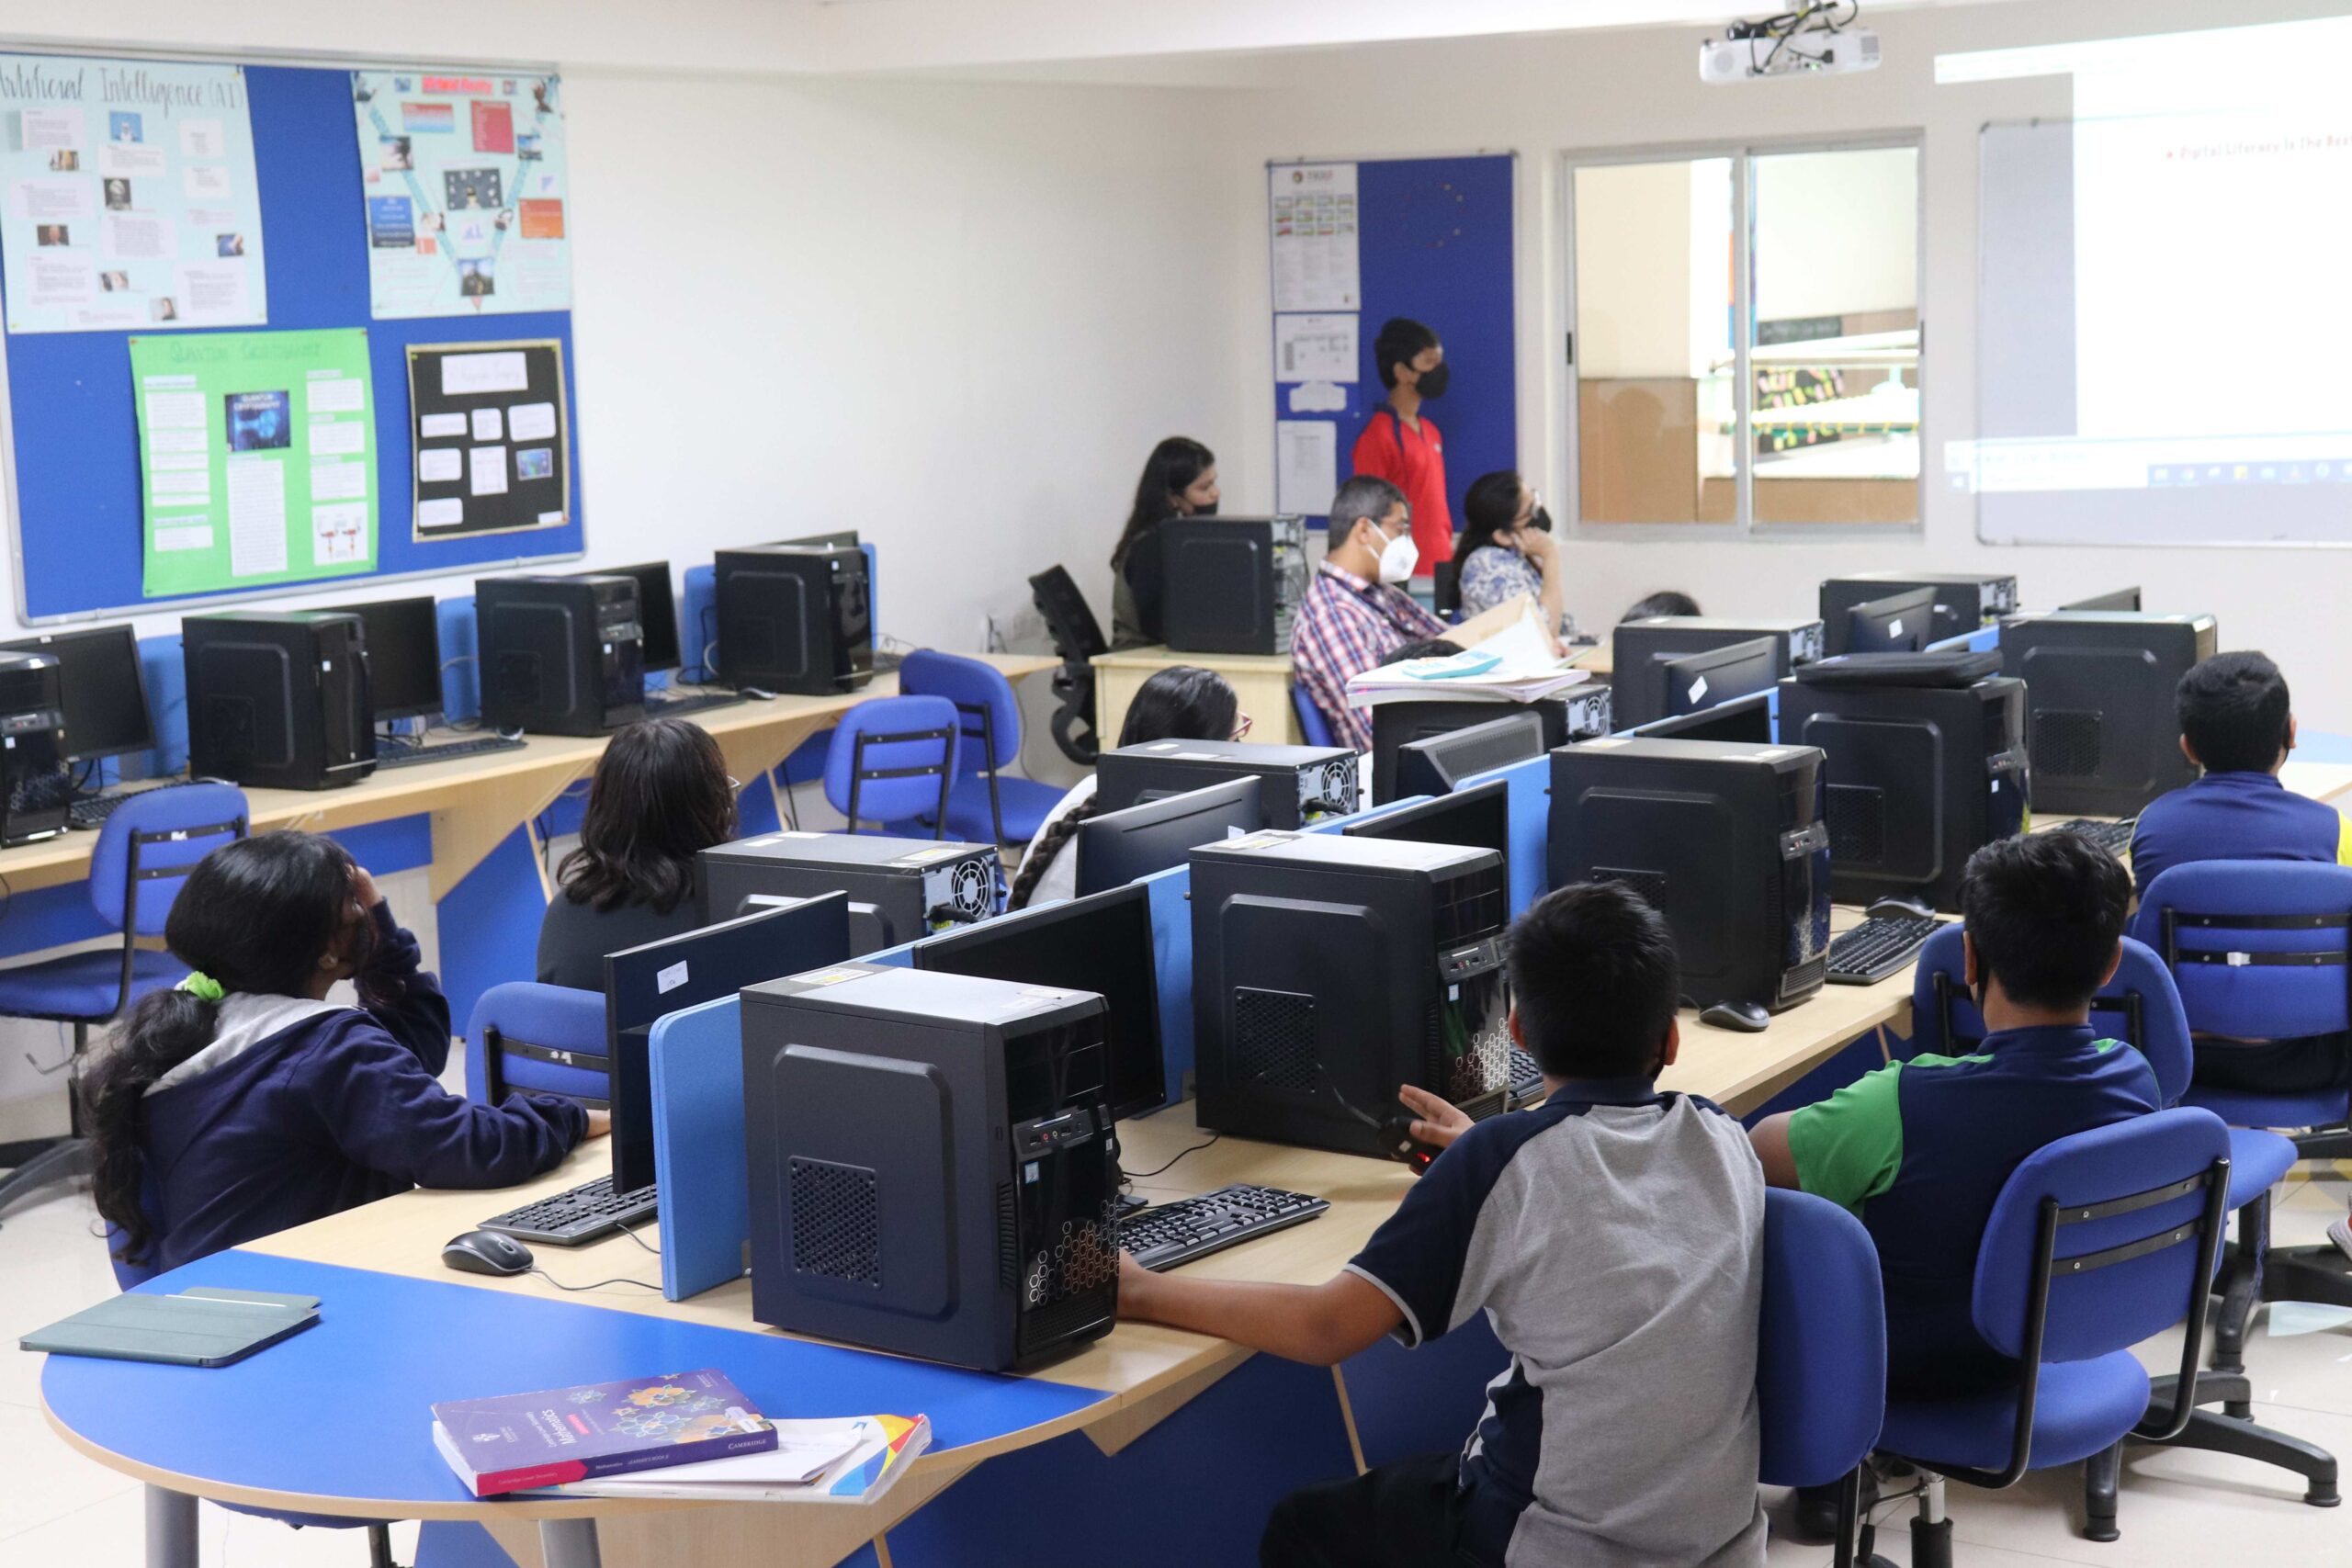 Crossing all the barriers of quarantine, Trio World Academy is connecting to their students using creative and digital platforms